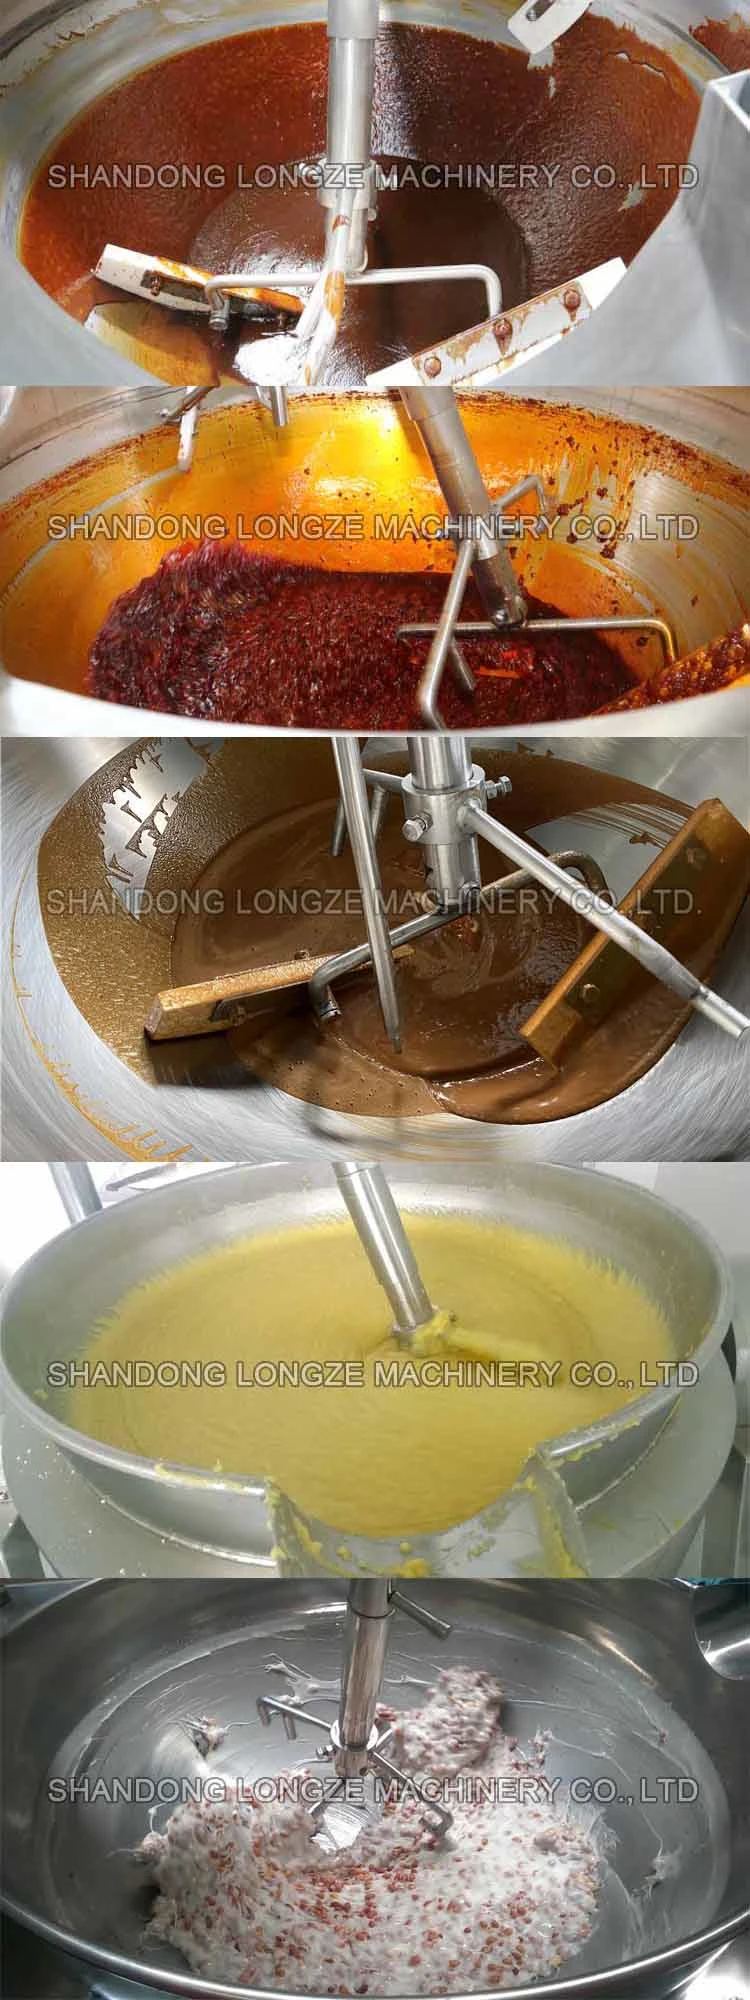 China Manufacturer Curry Paste Cooking Mixer Machine Automatic Cooking Mixer Machine Shawarma Cooking Machine